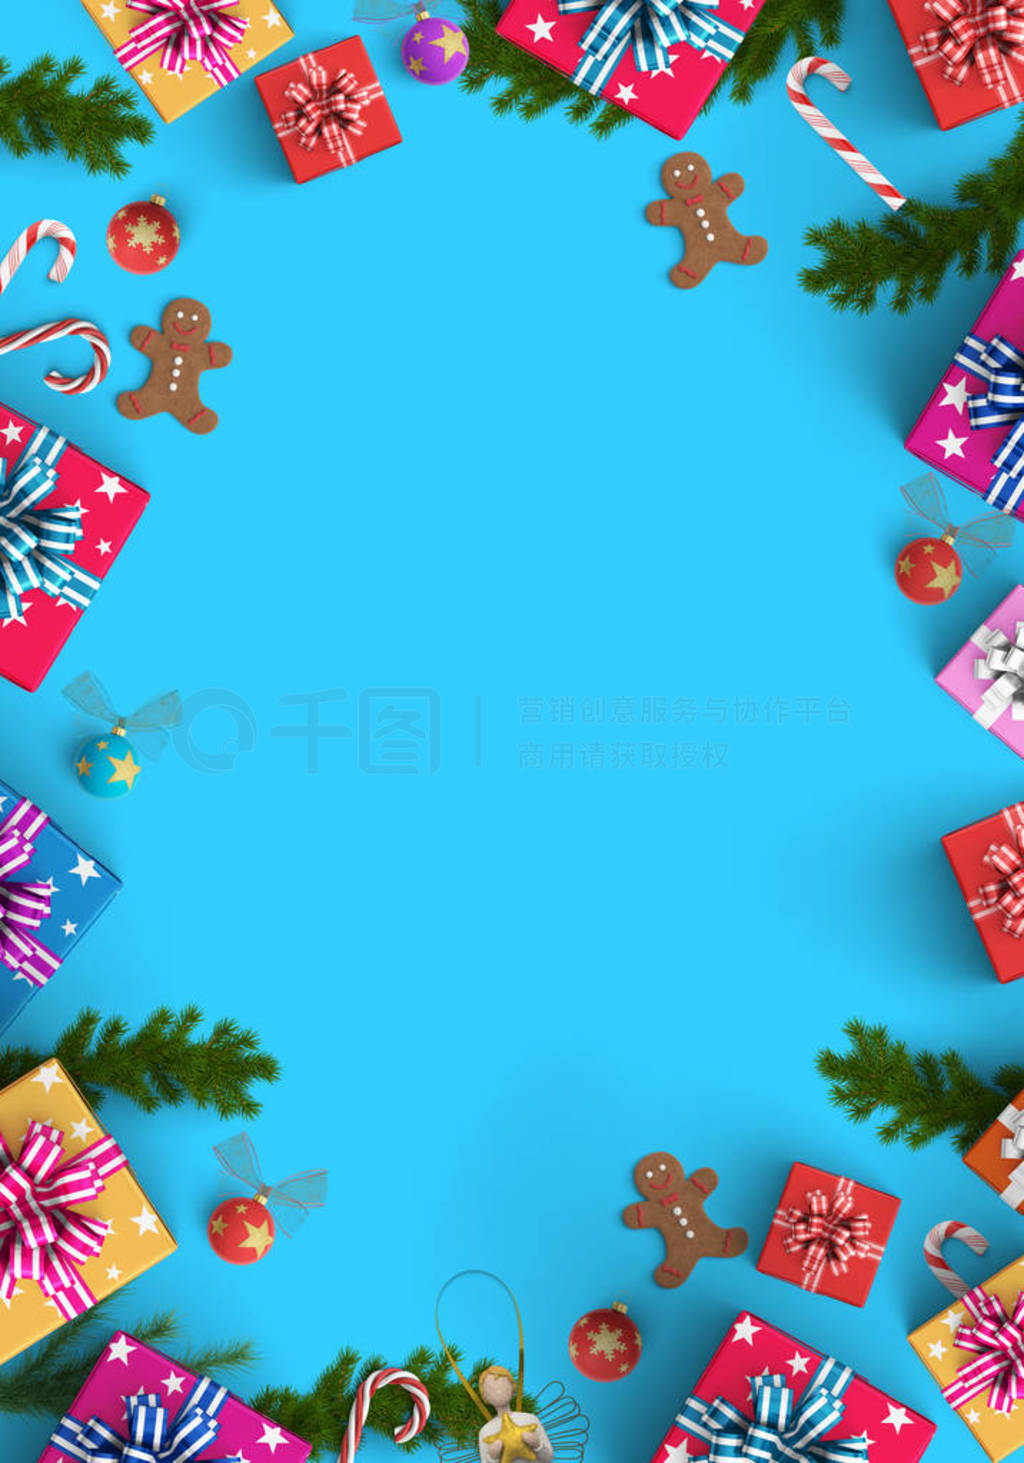 Merry Christmas and gift box background